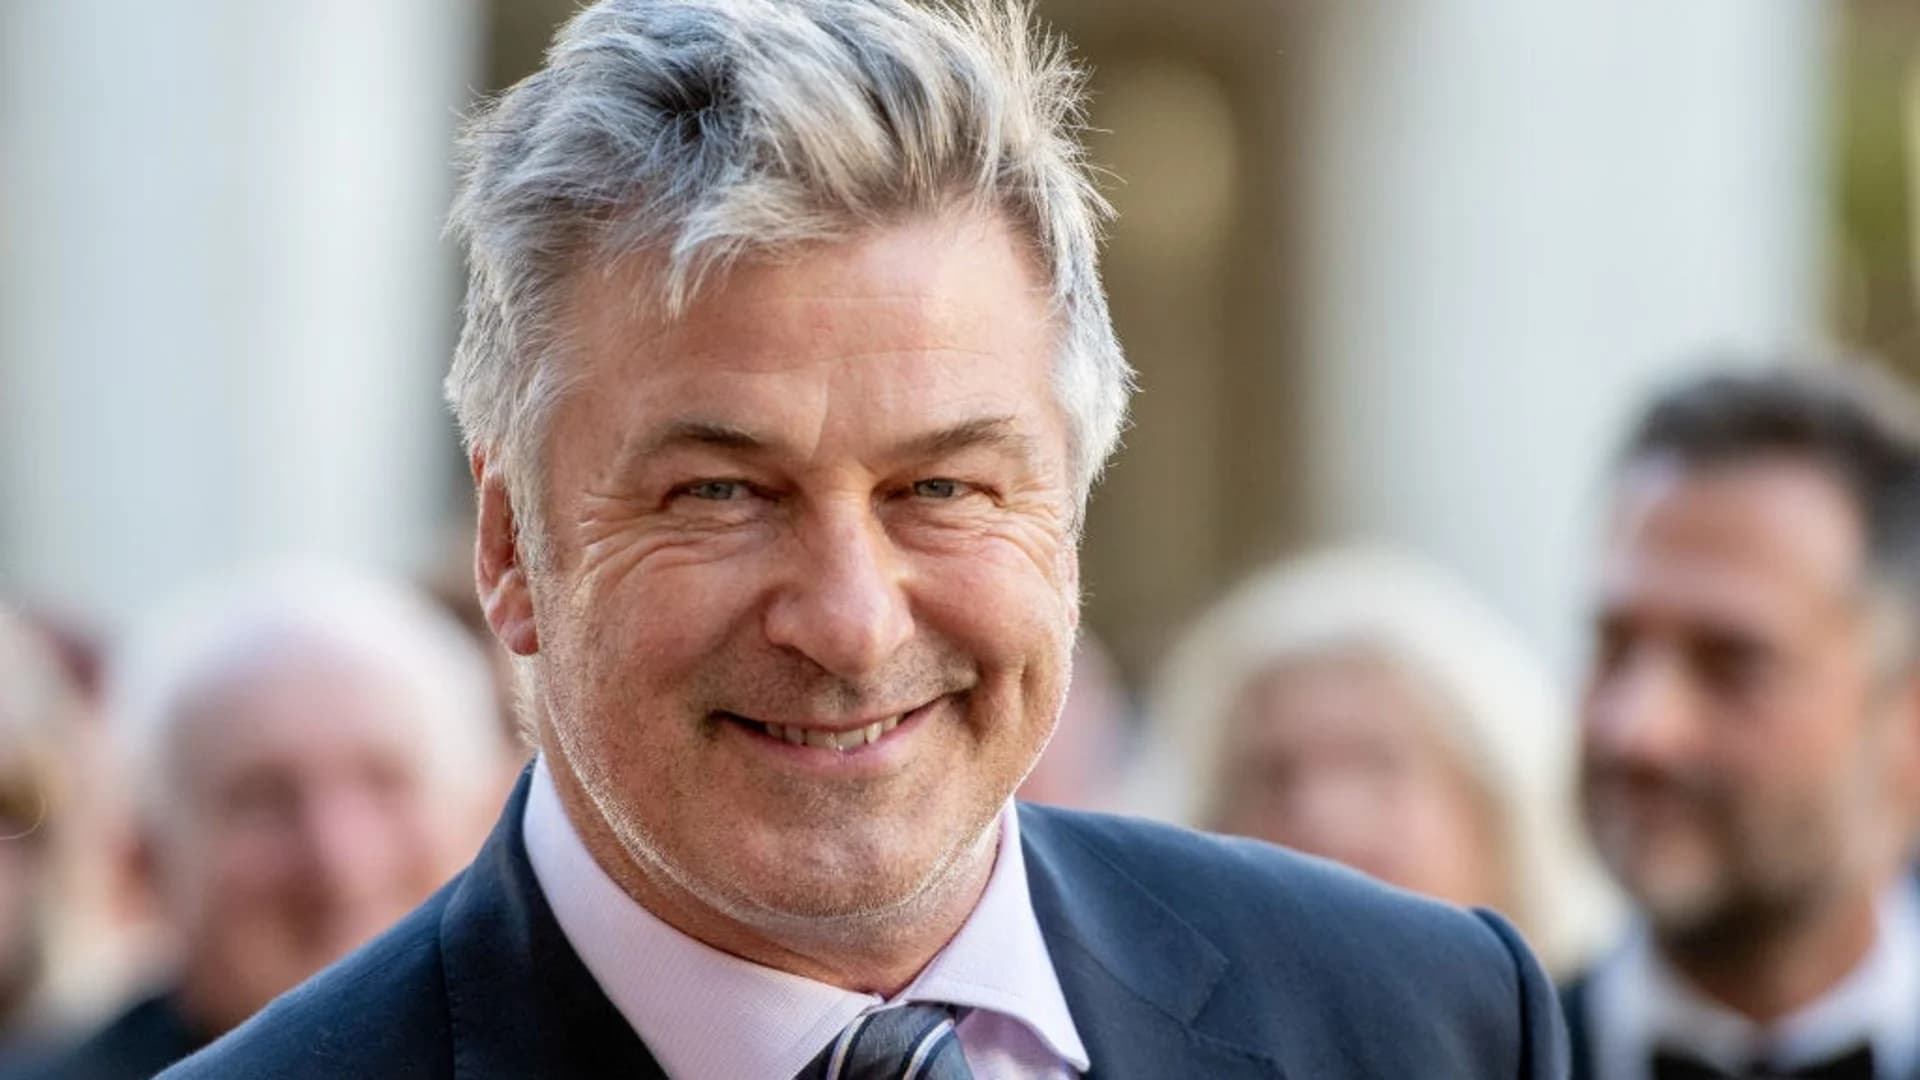 Alec Baldwin charged with assault in alleged parking dispute